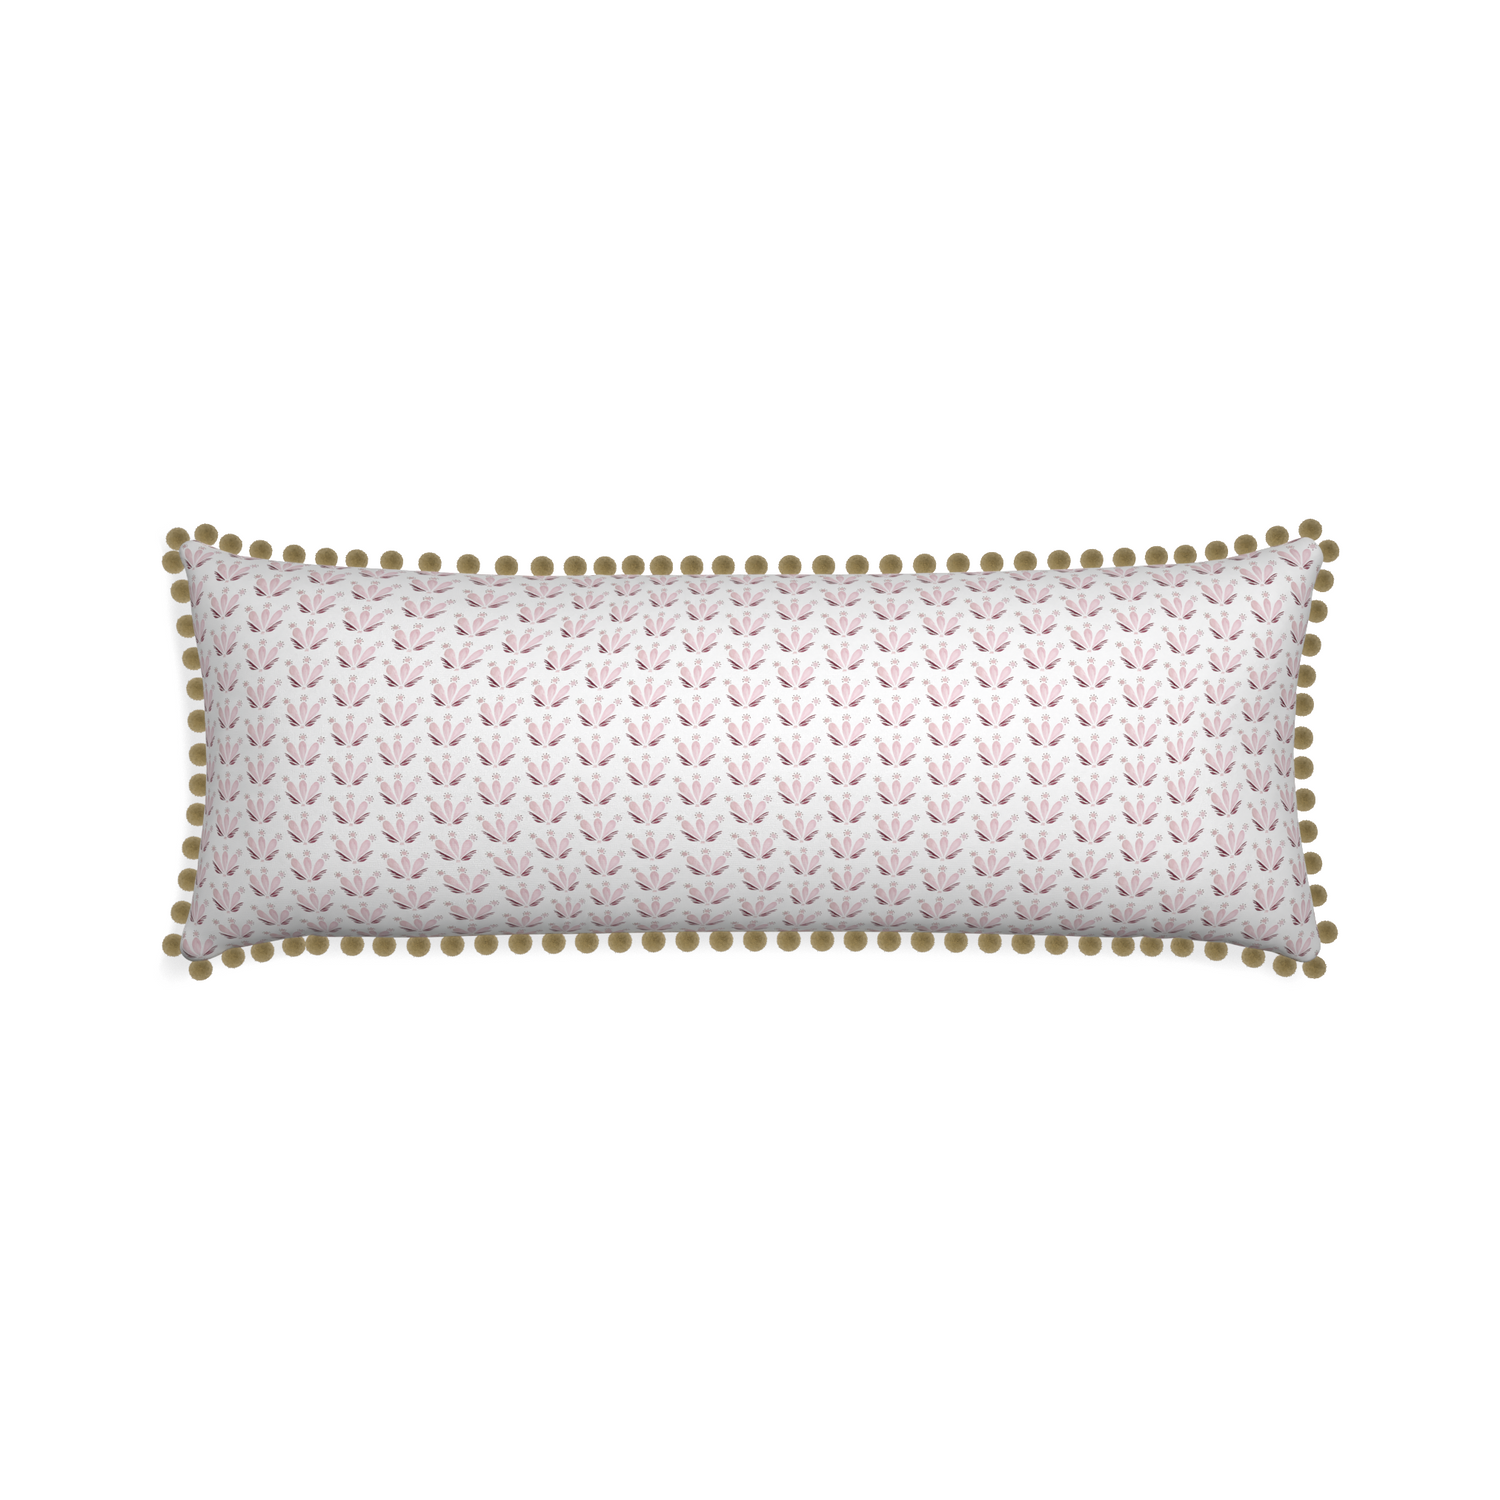 Xl-lumbar serena pink custom pillow with olive pom pom on white background